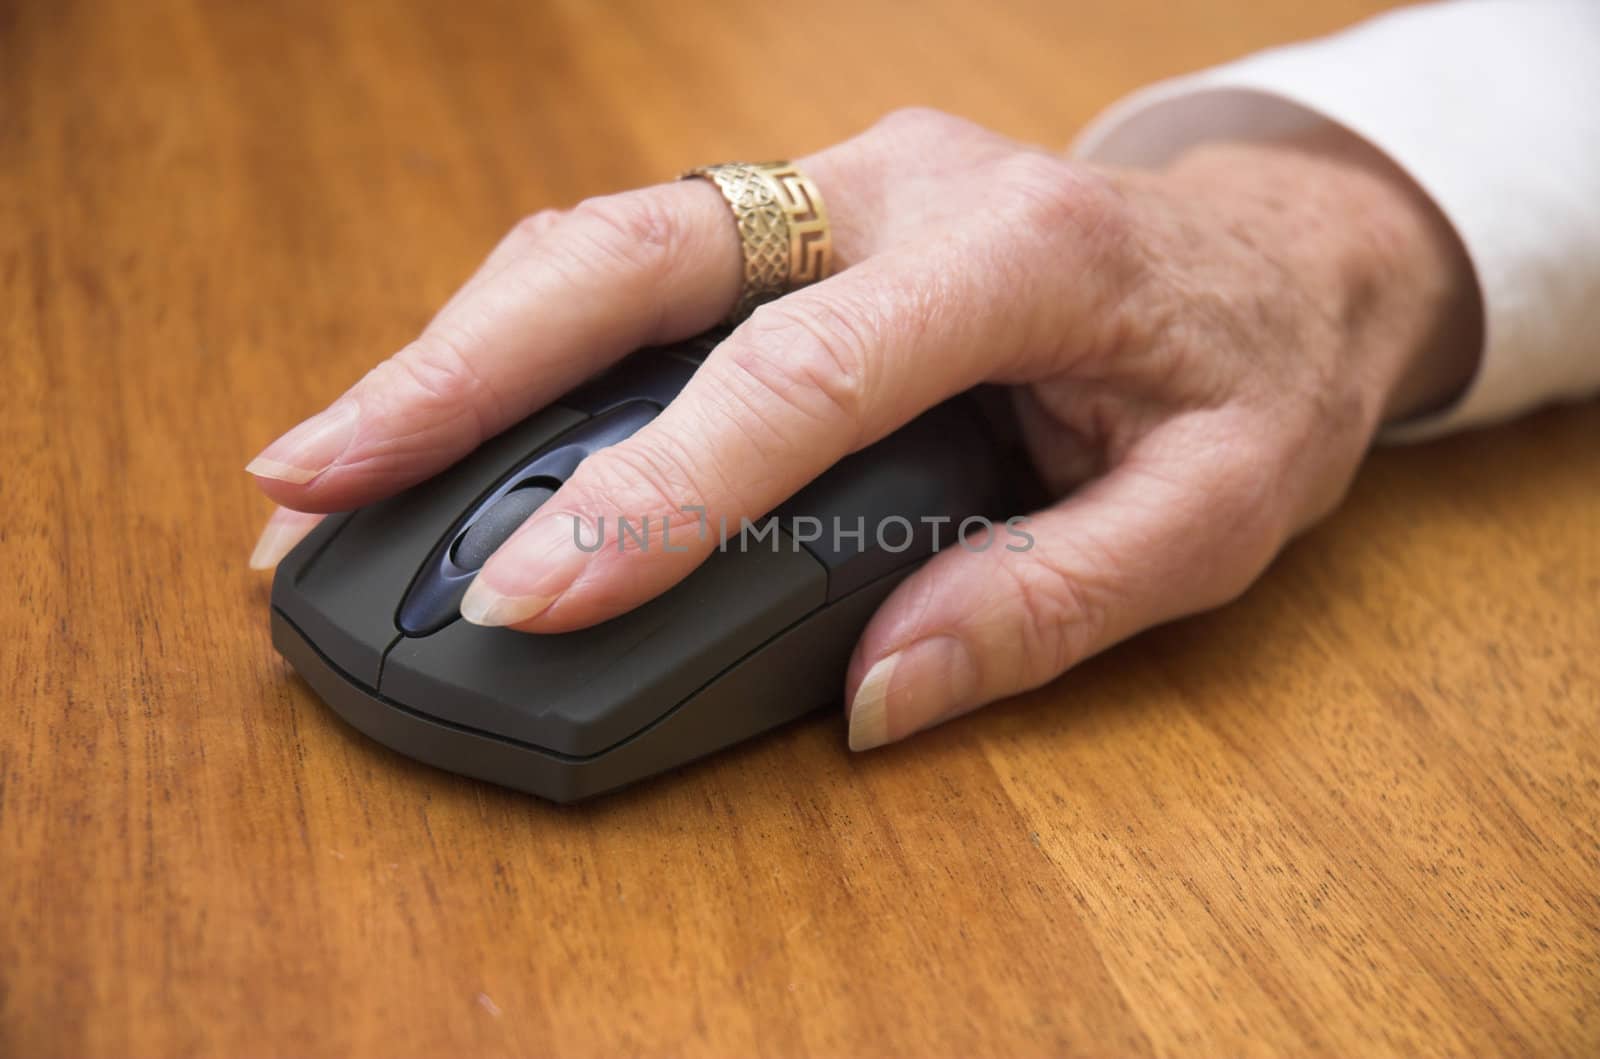 Older woman's hand using a wireless computer mouse. Focus is on the front of the mouse / end of the fingers.